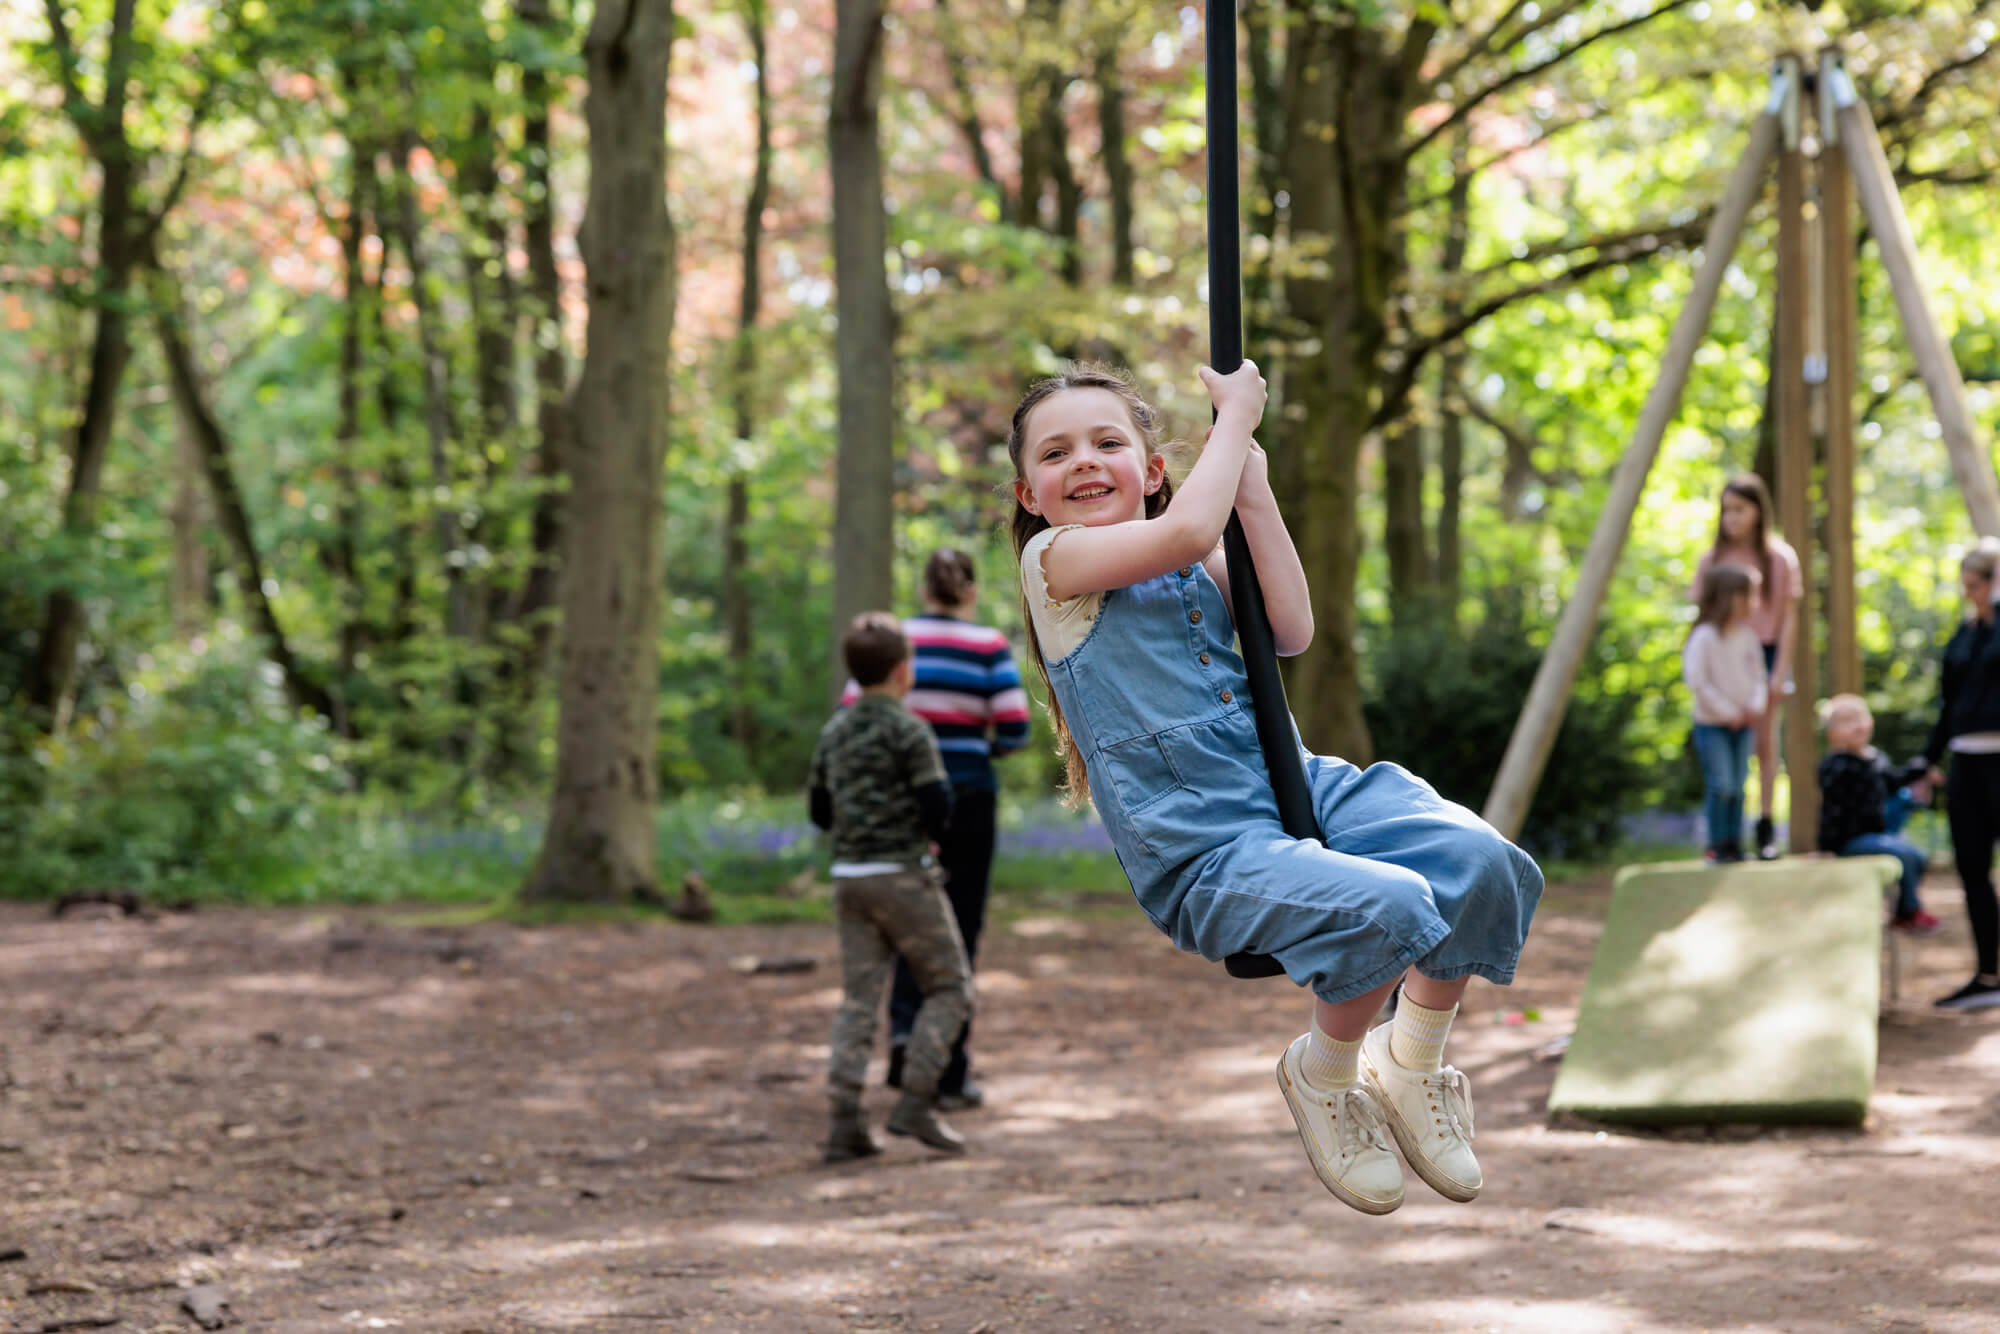 Case study about Playdale revolutionised the way that they work, while helping thousands of children enjoy the power of play. 